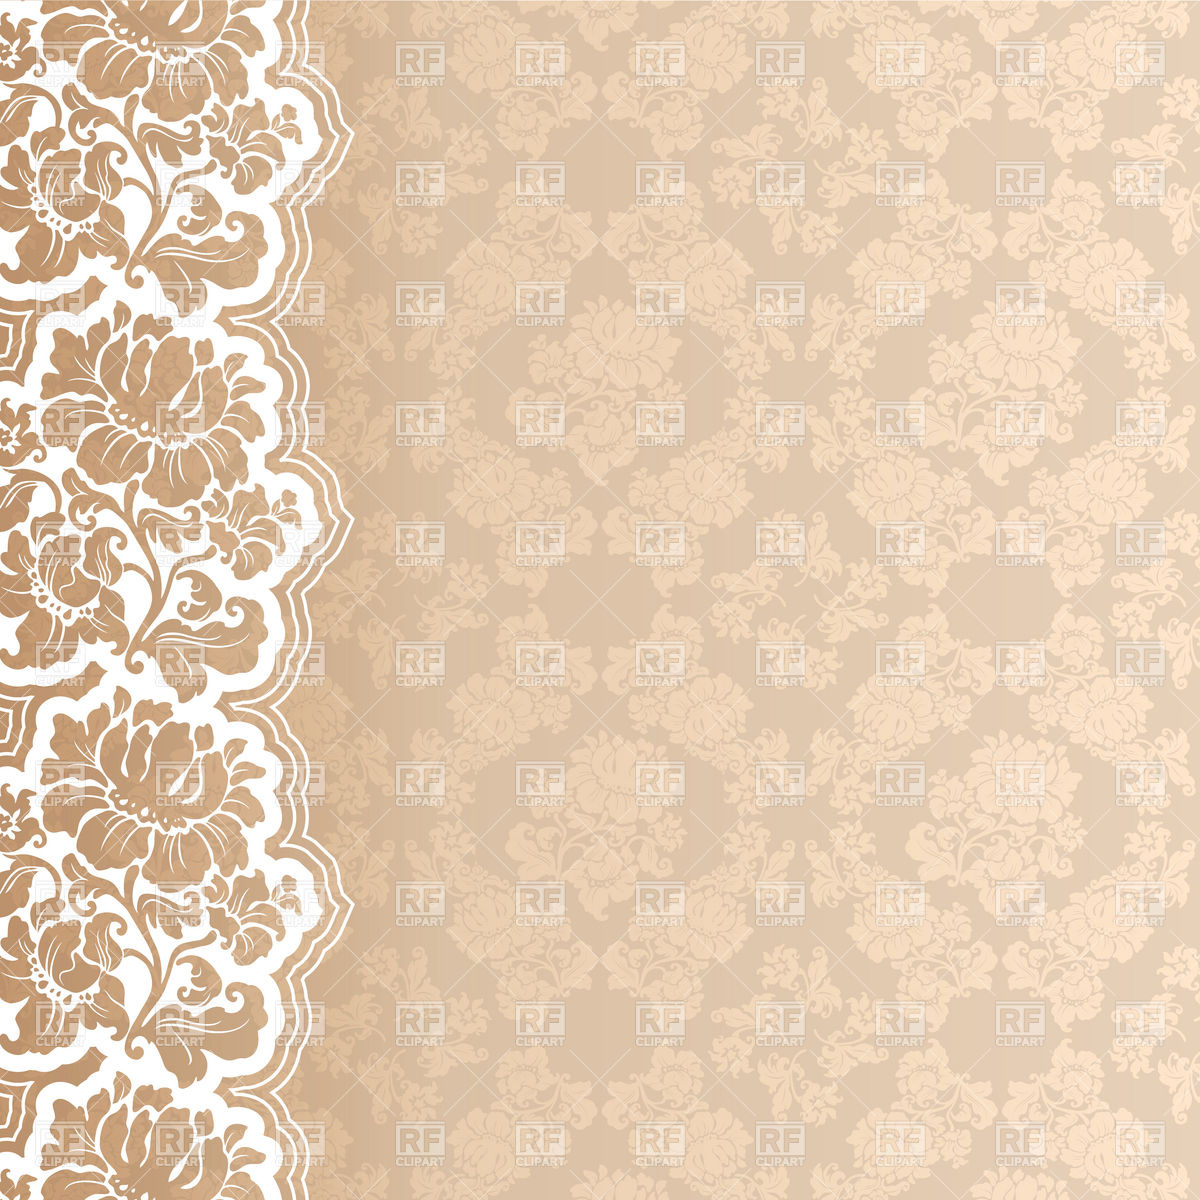 Floral Victorian Wallpaper With Lace Border Vector Image Of